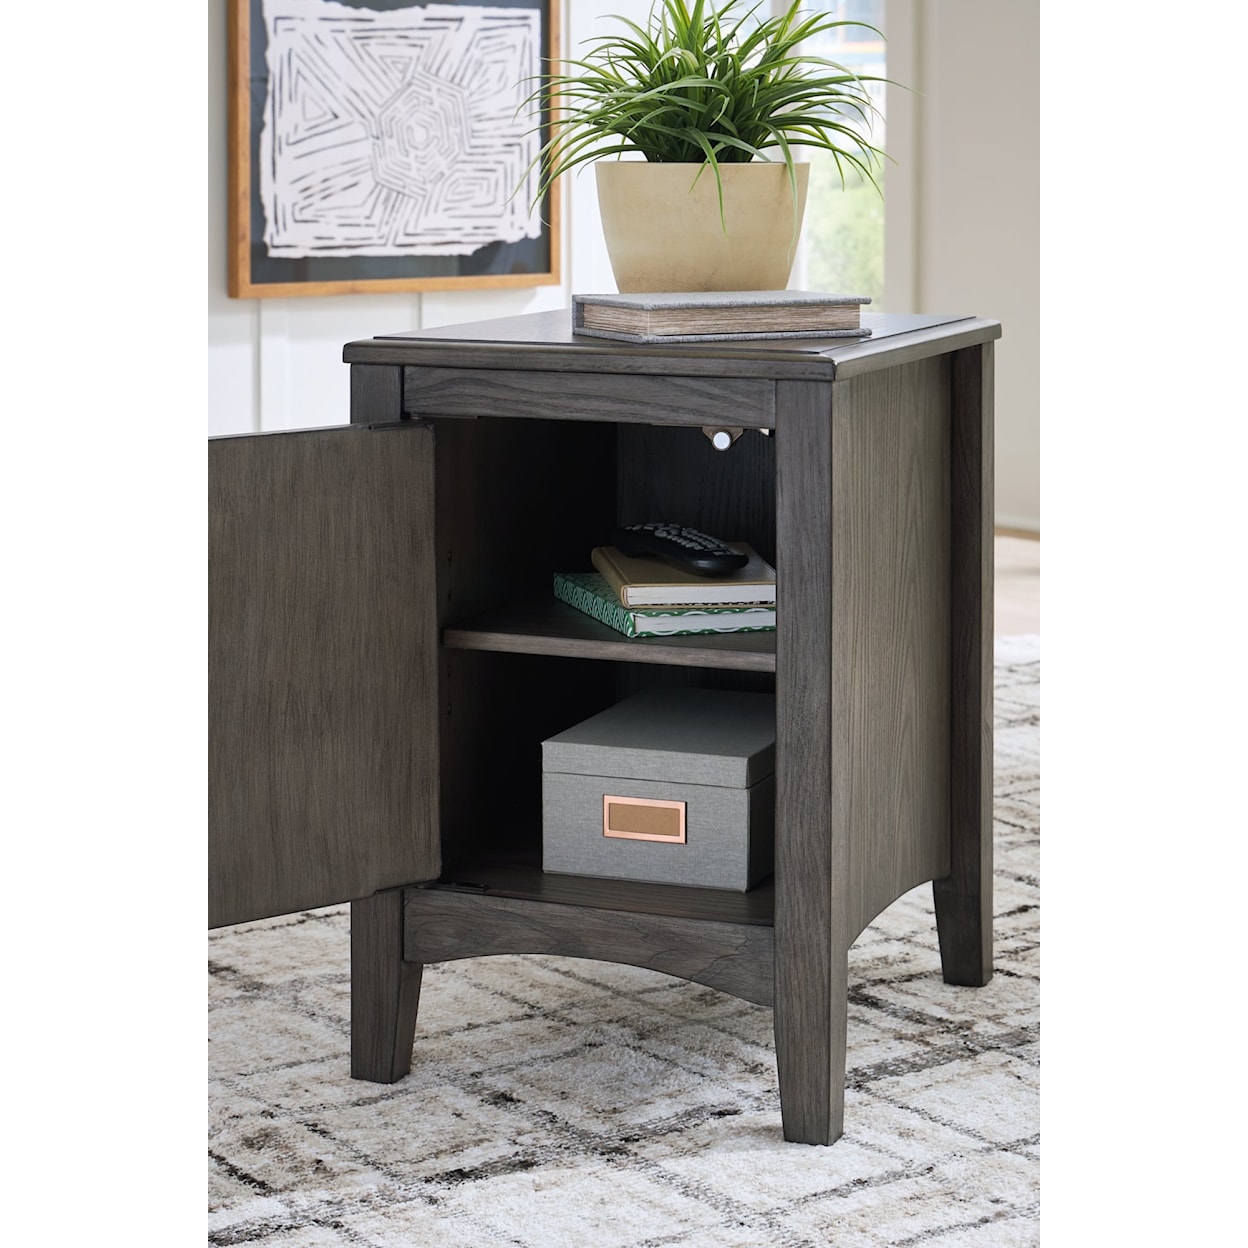 Benchcraft Montillan Chairside End Table